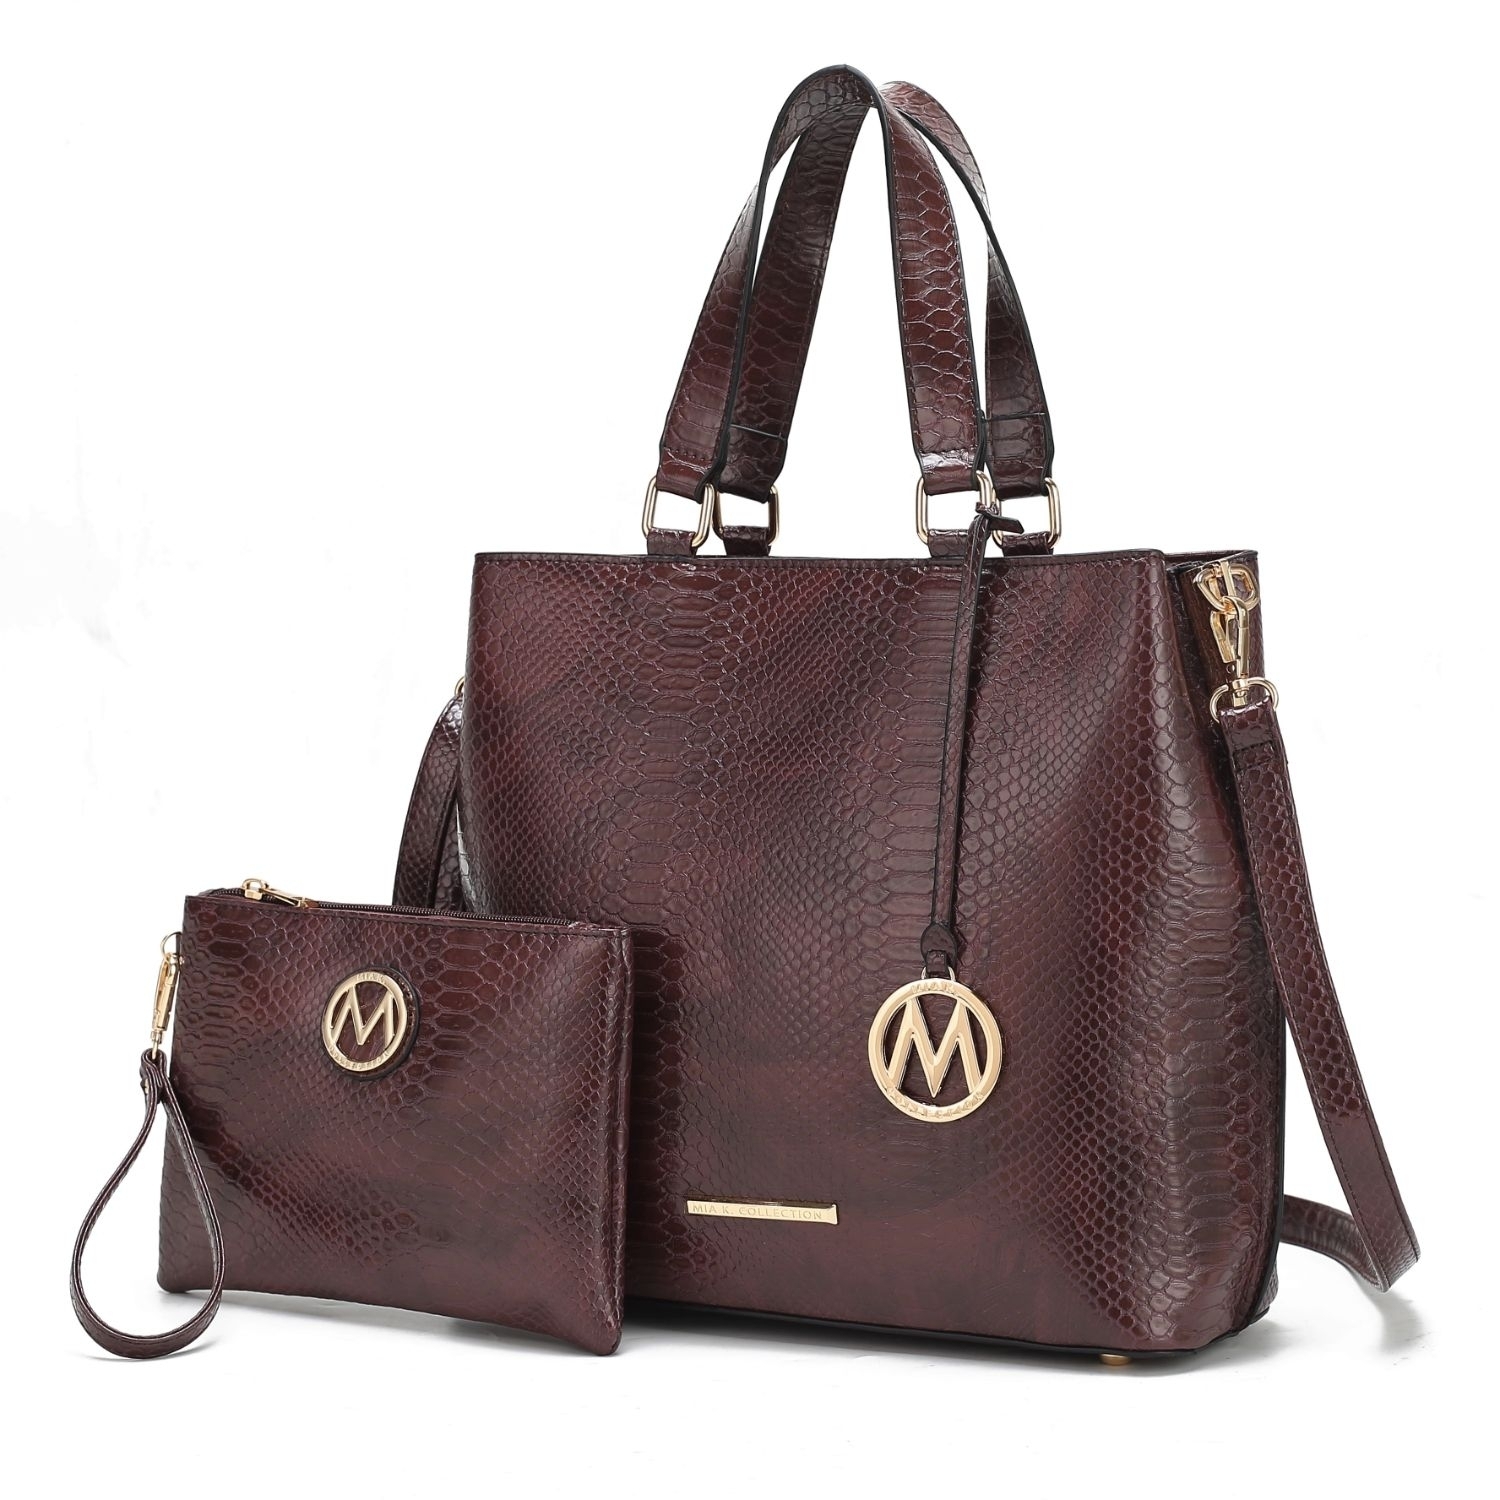 MKF Collection Beryl Snake-embossed Vegan Leather Women's Tote Bag With Wristlet - 2 Pieces, By Mia K - Coffee